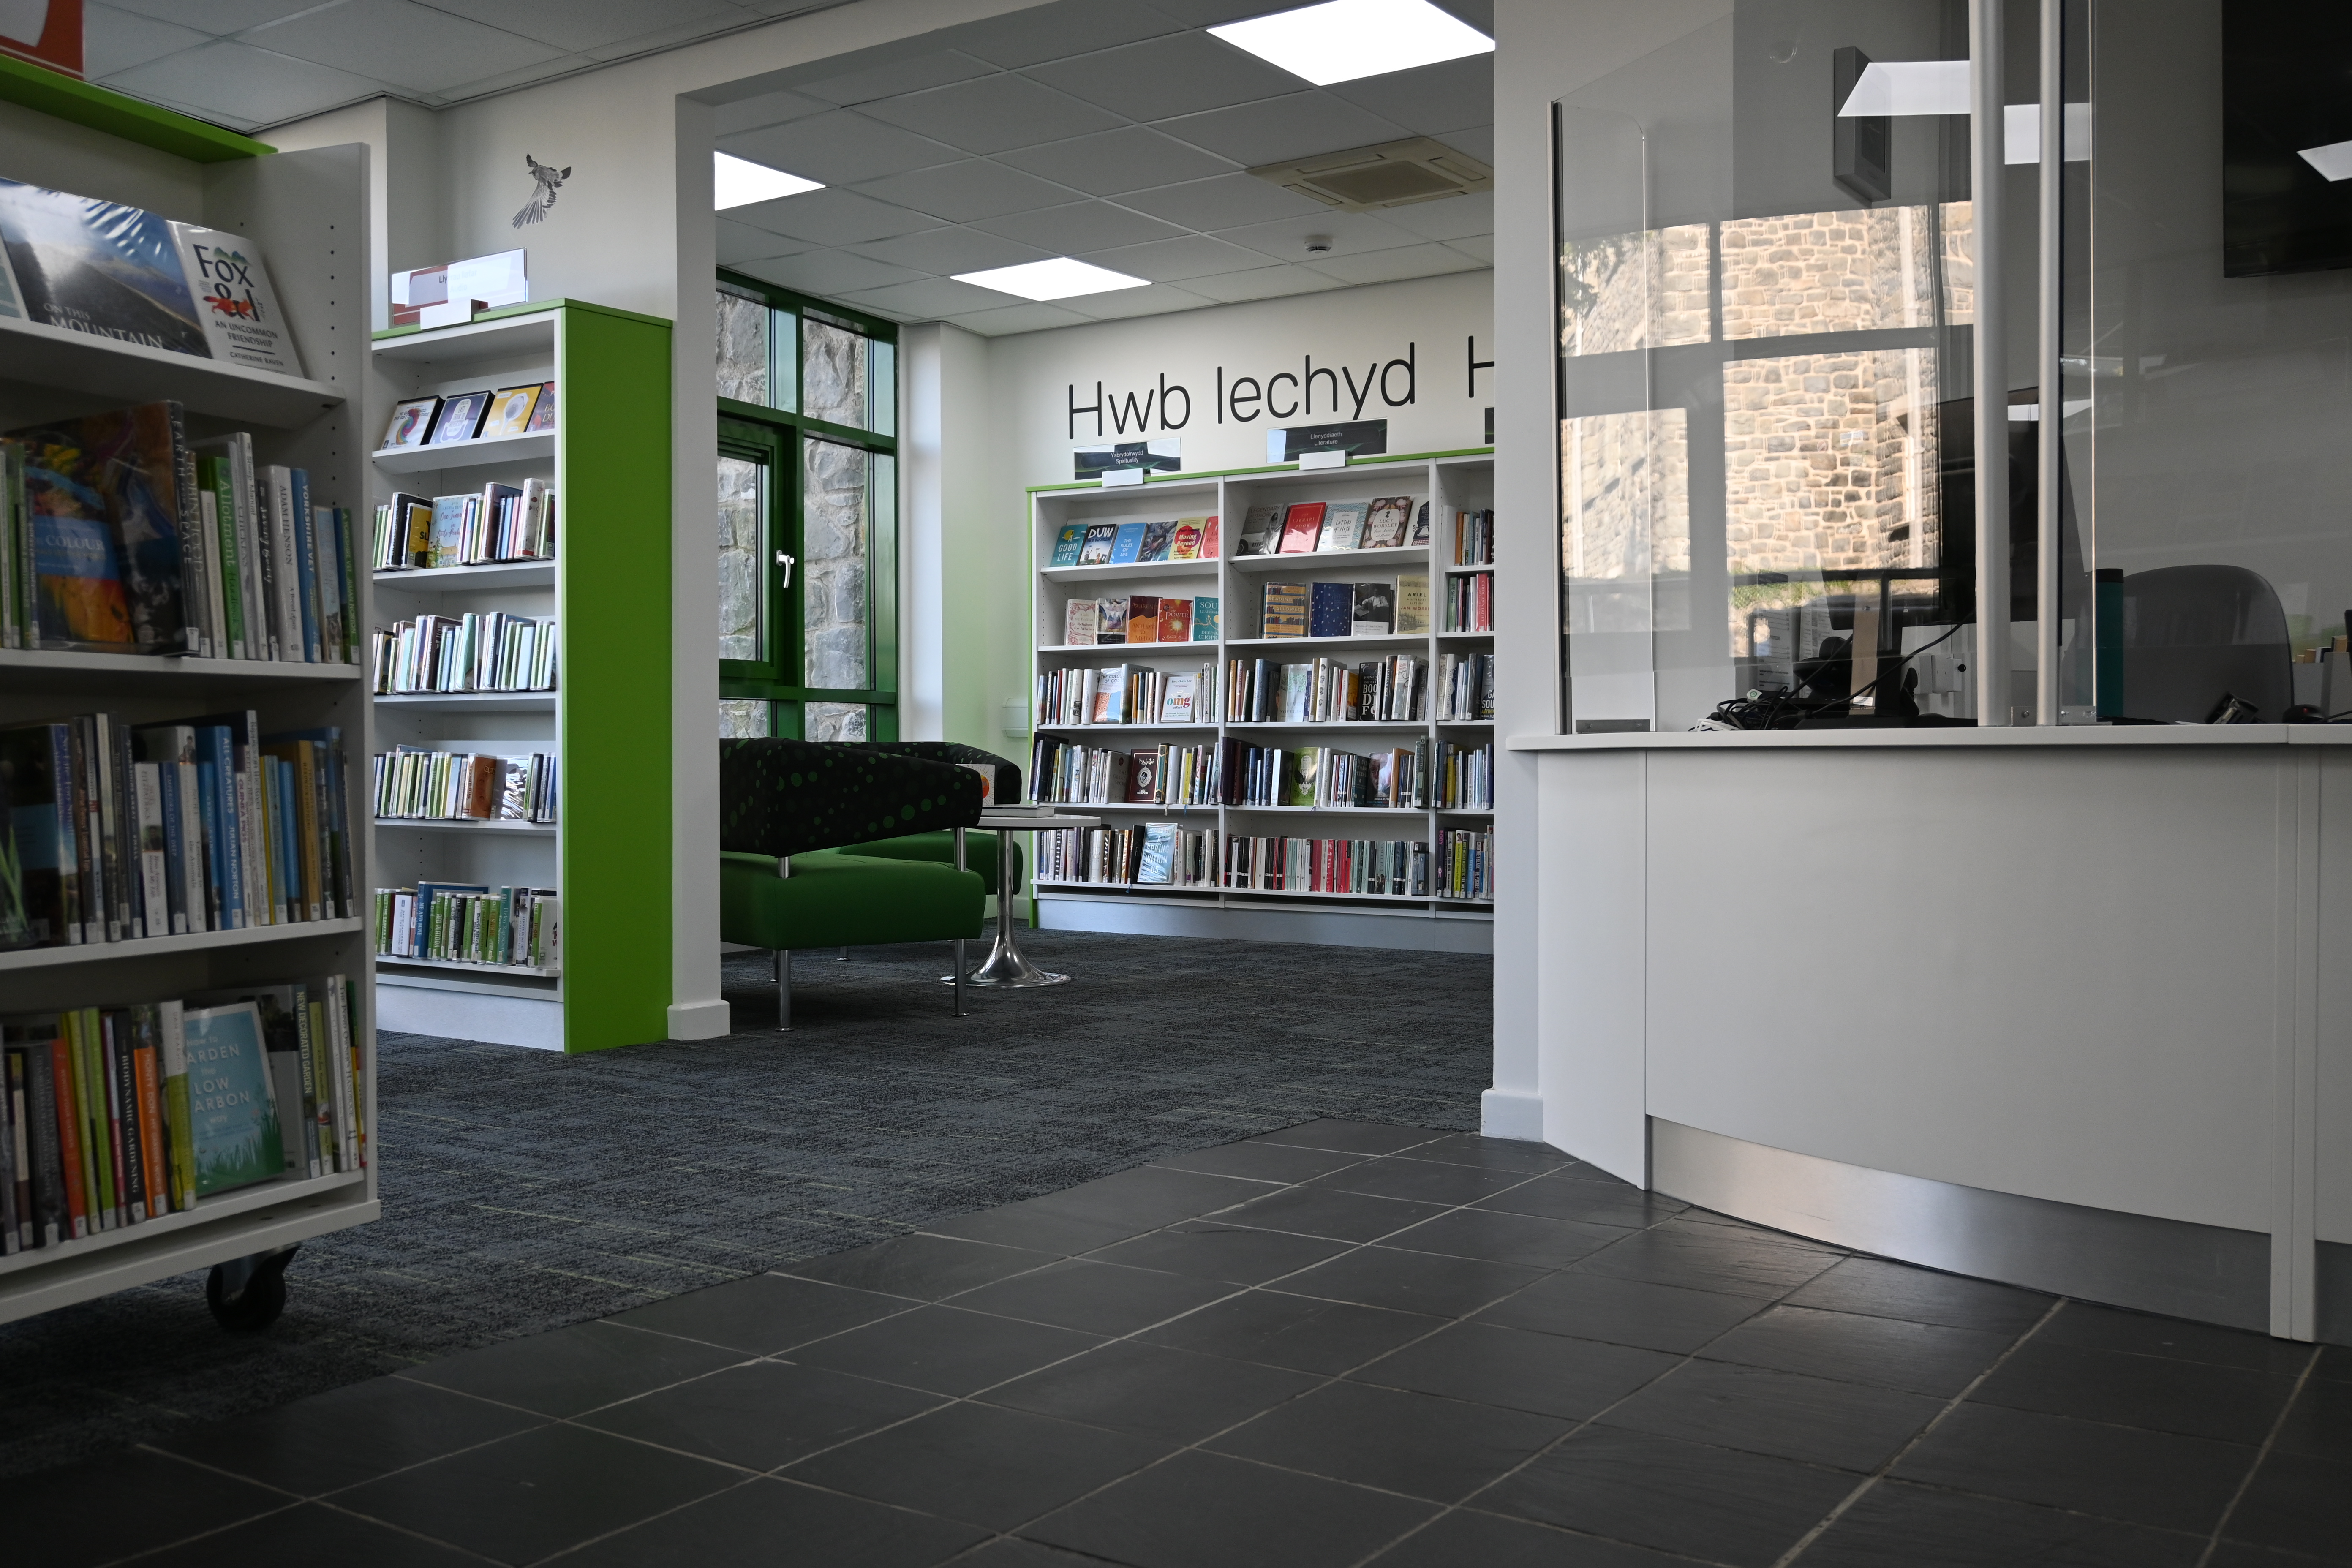 Entrance to Wellbeing Hub